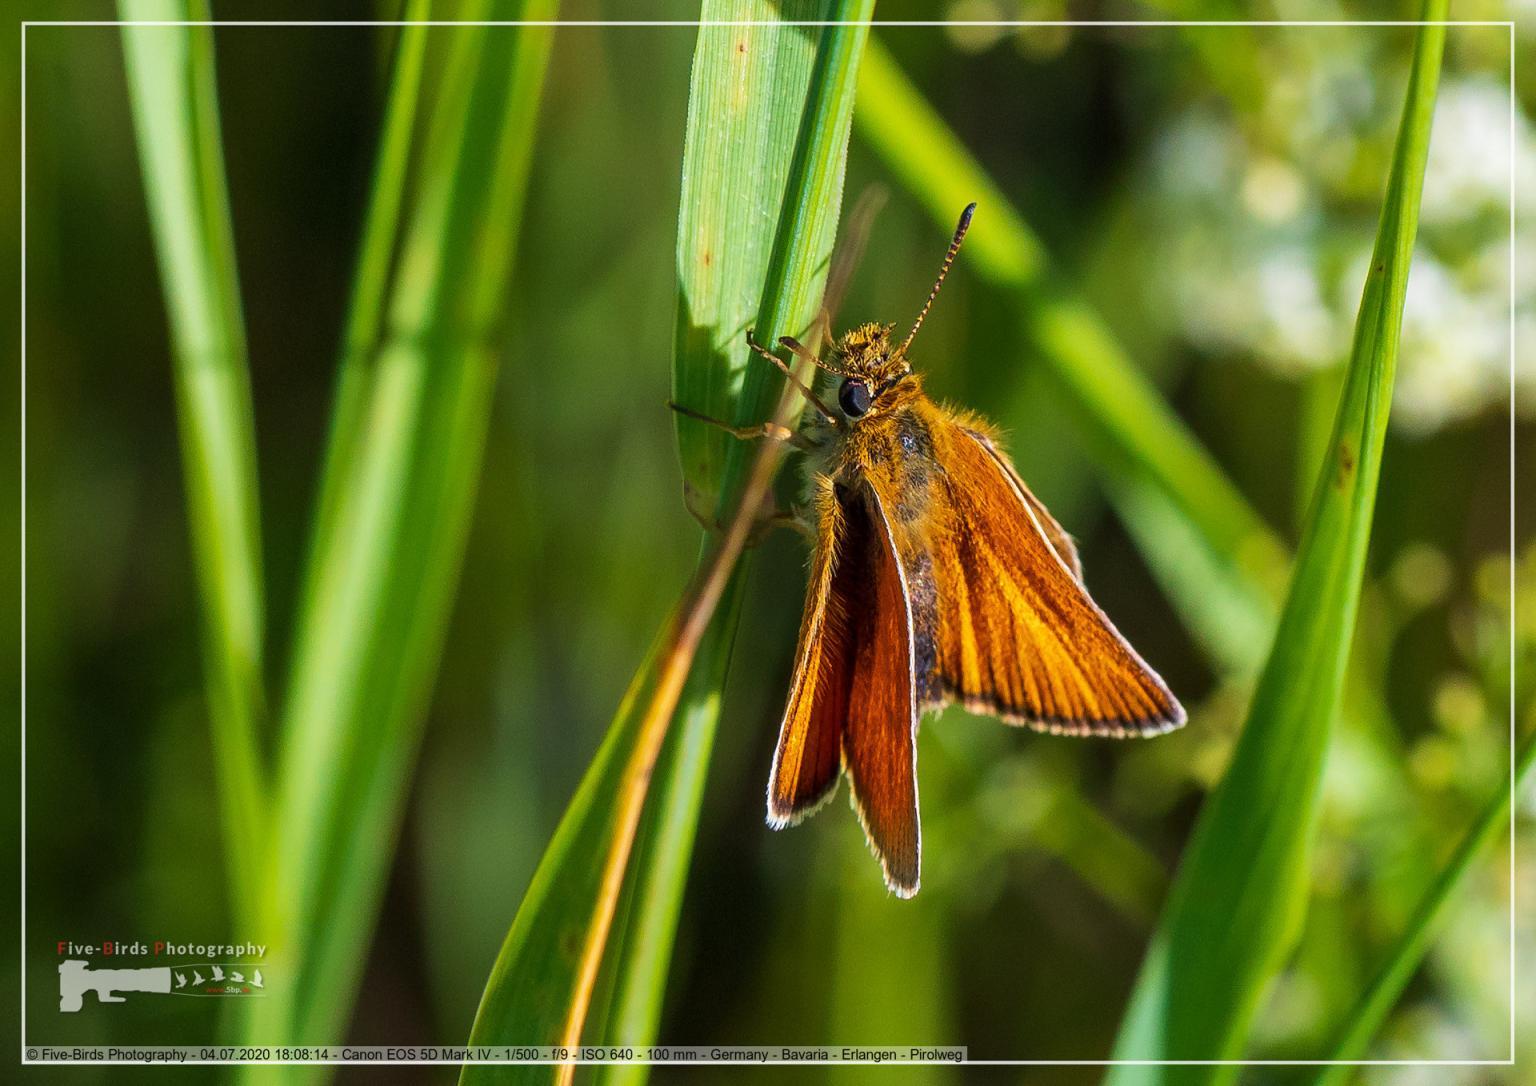 A small skipper sits on a blade of grass